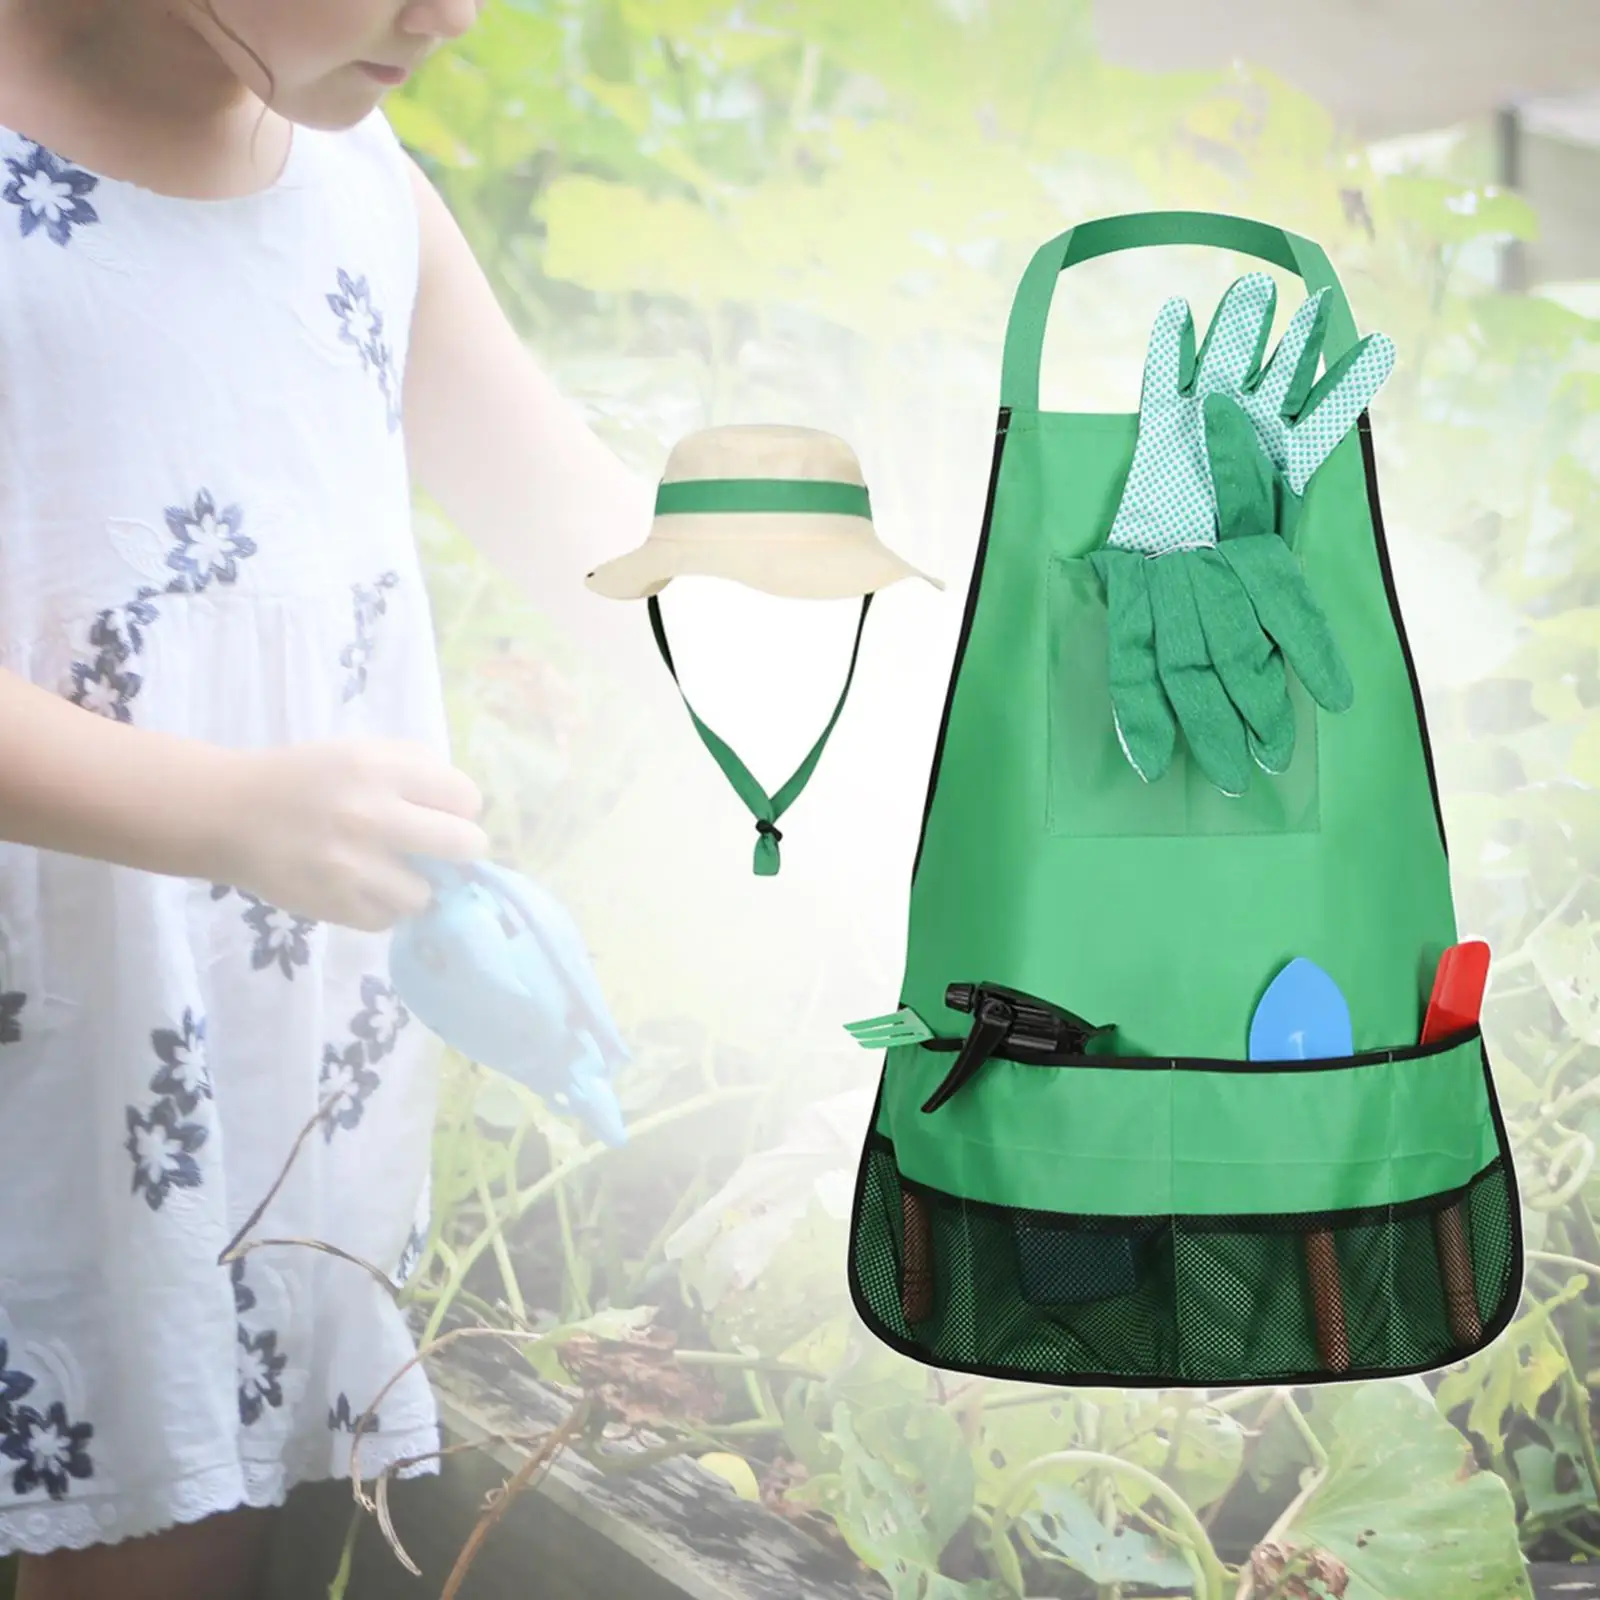 Mini Spade Gloves Apron Garden Pretend Toy Role Play Little Gardeners Playset Toddlers Gardening Tool Kits for Preschool Age 3-6